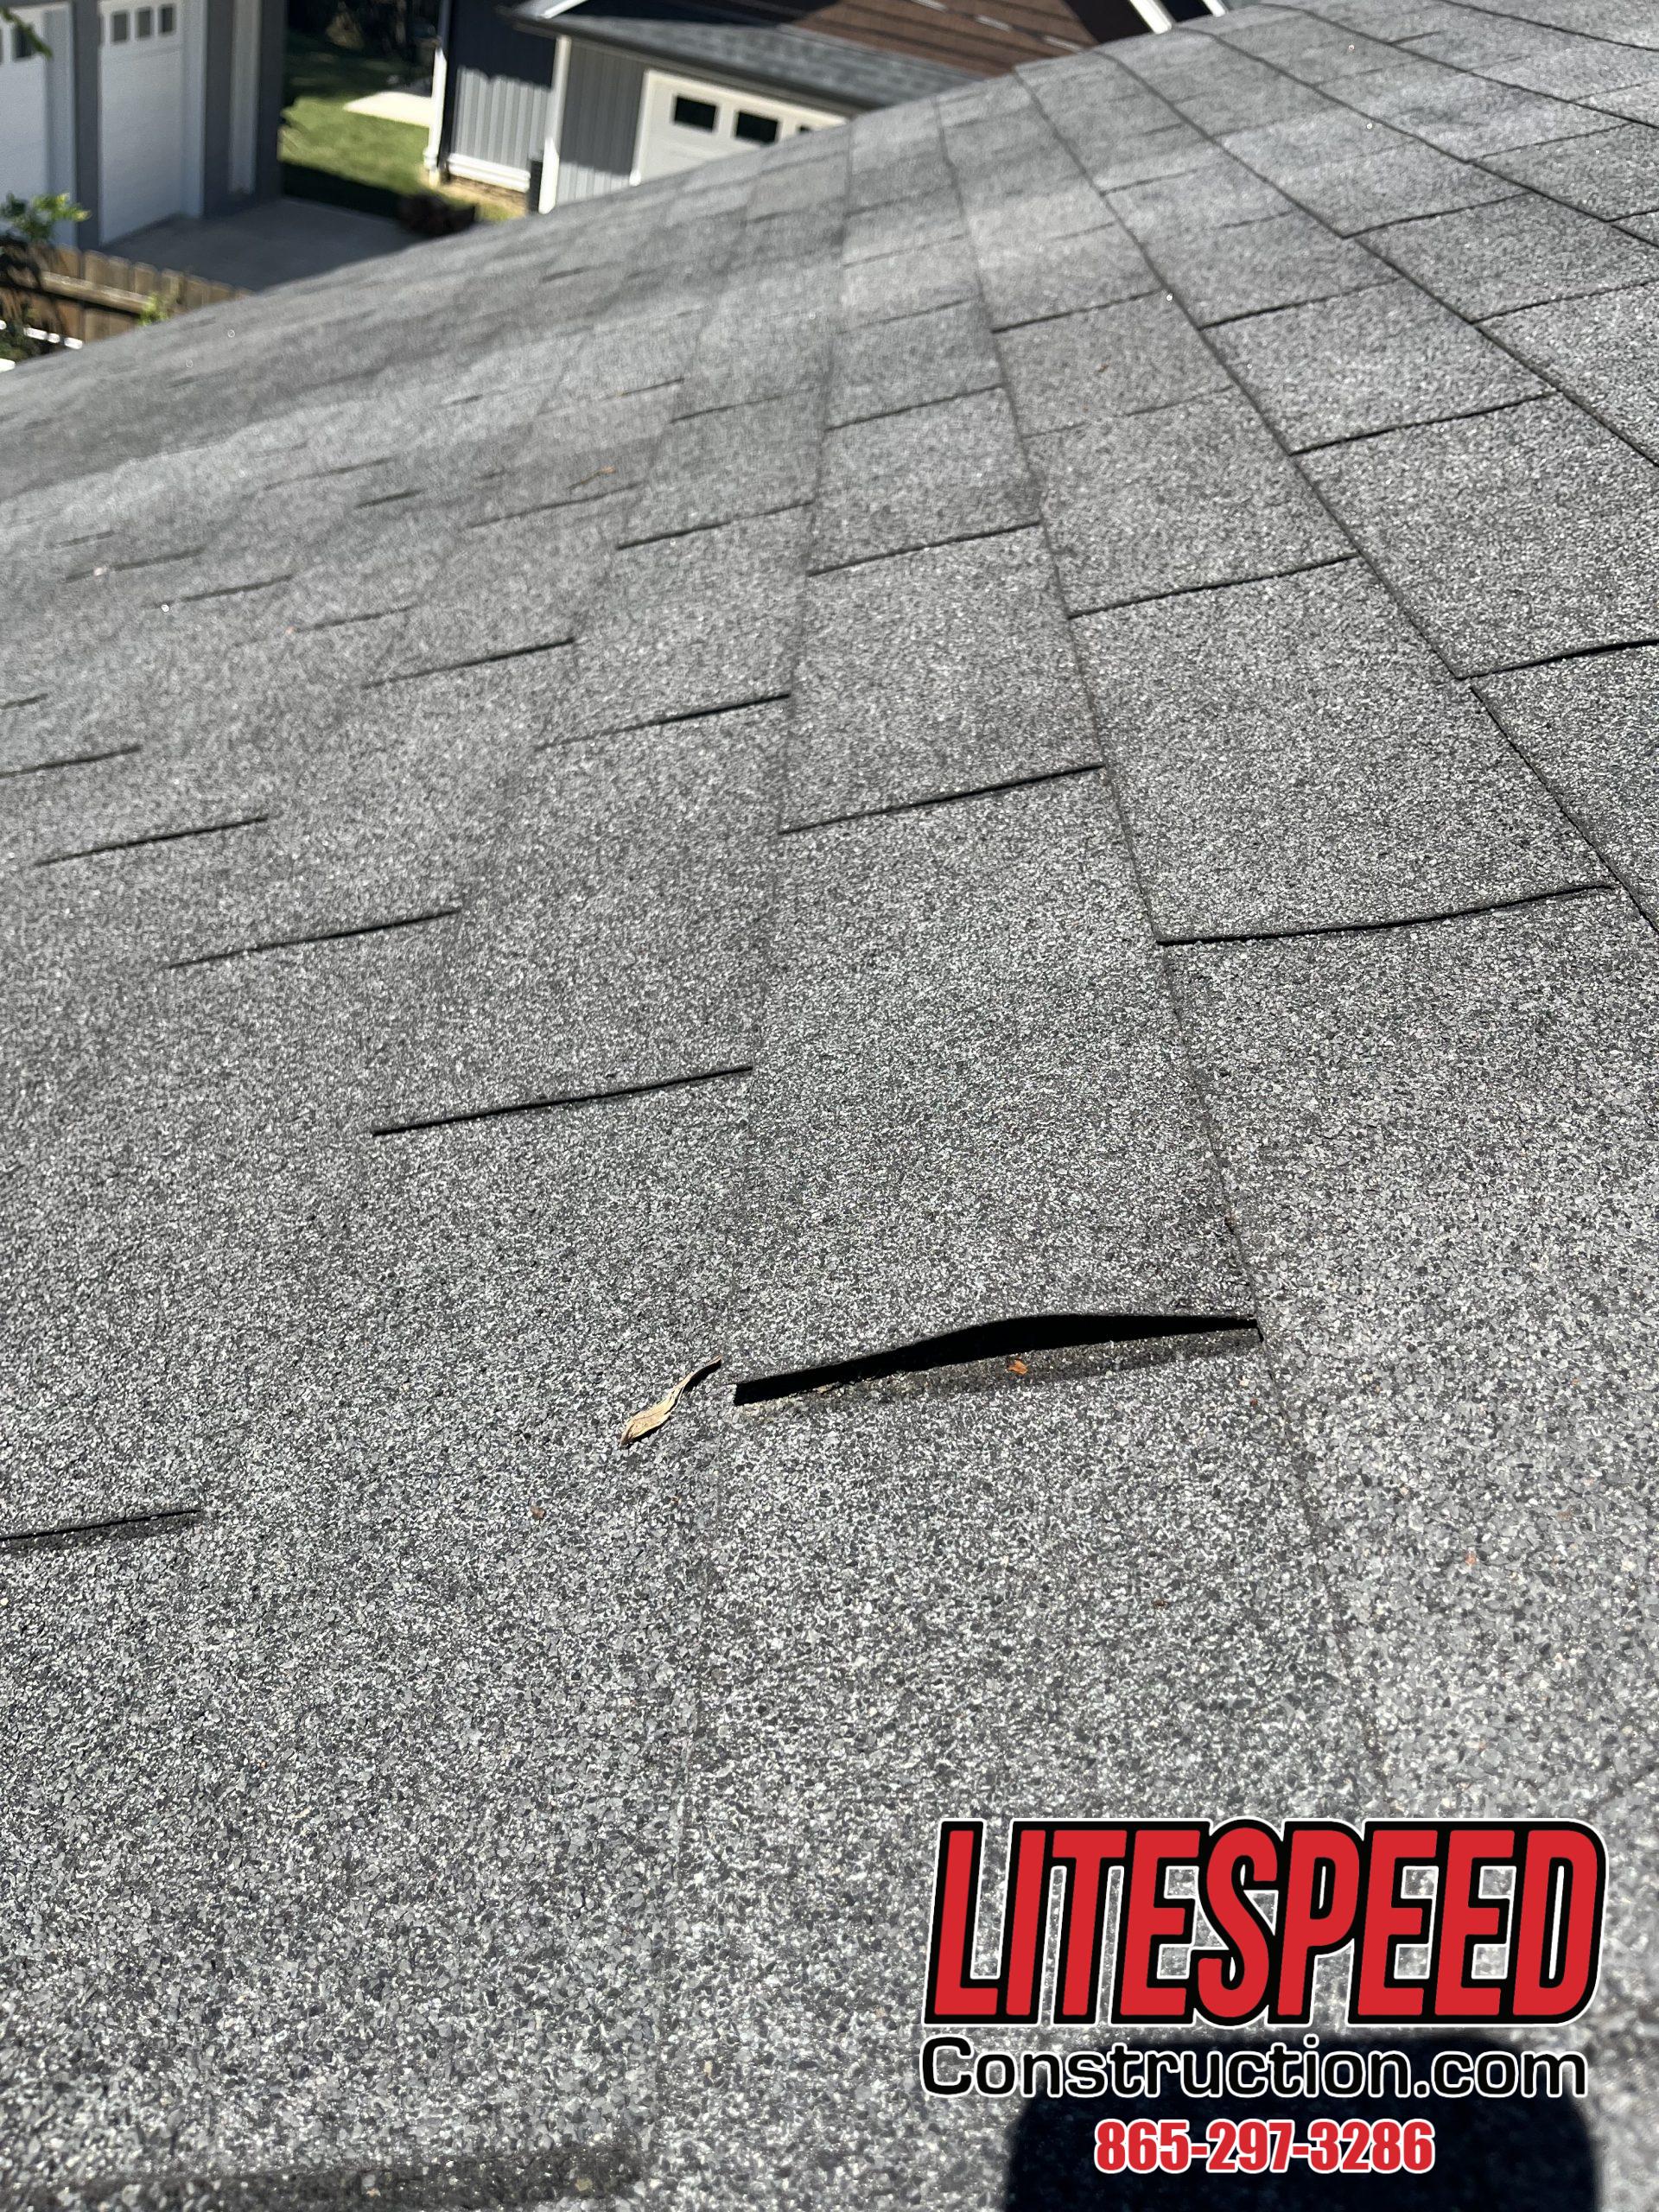 This is a picture of a nail pop under the shingles.